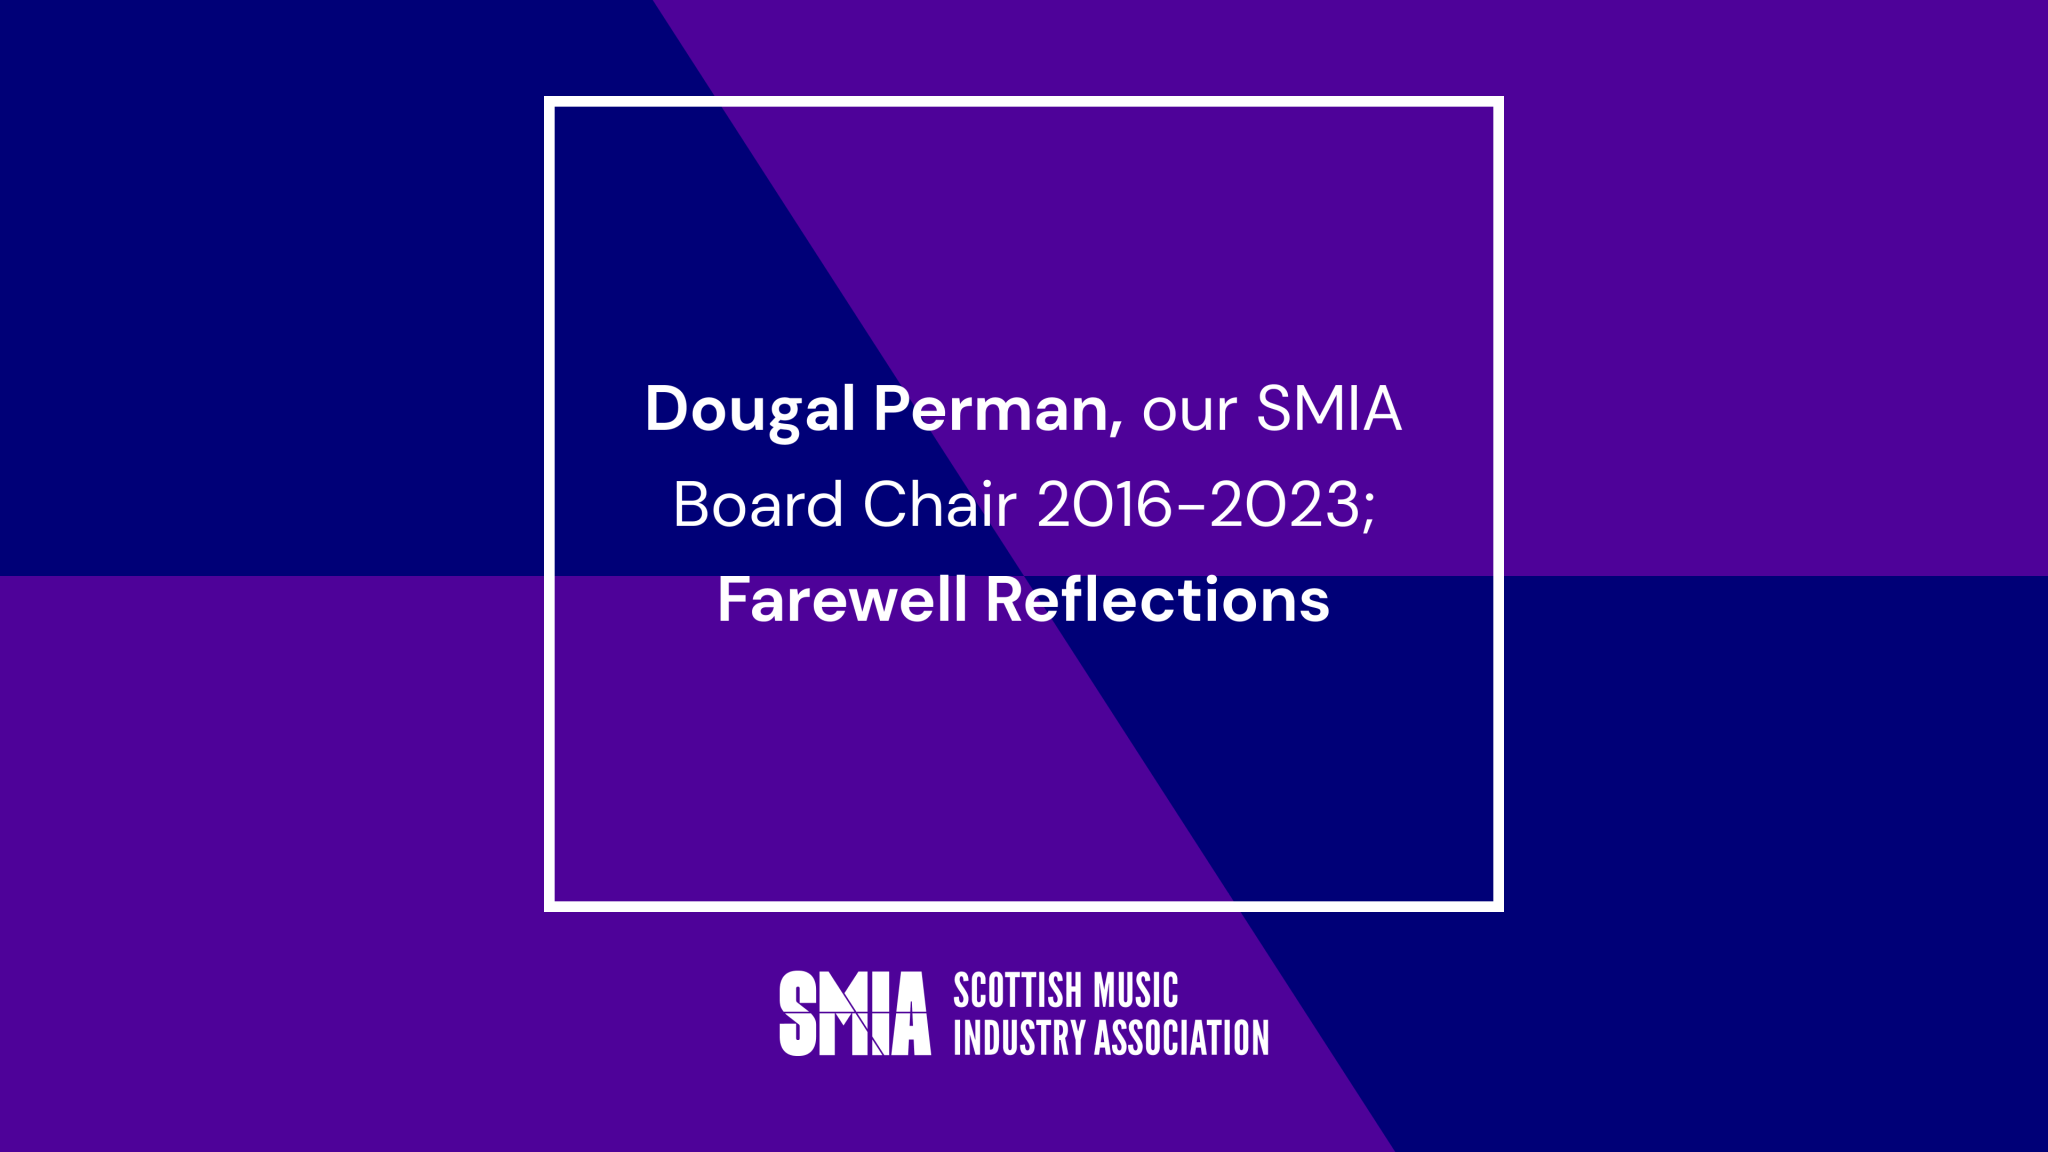 Dougal Perman, our SMIA Board Chair 2016 – 2023; Farewell Reflections